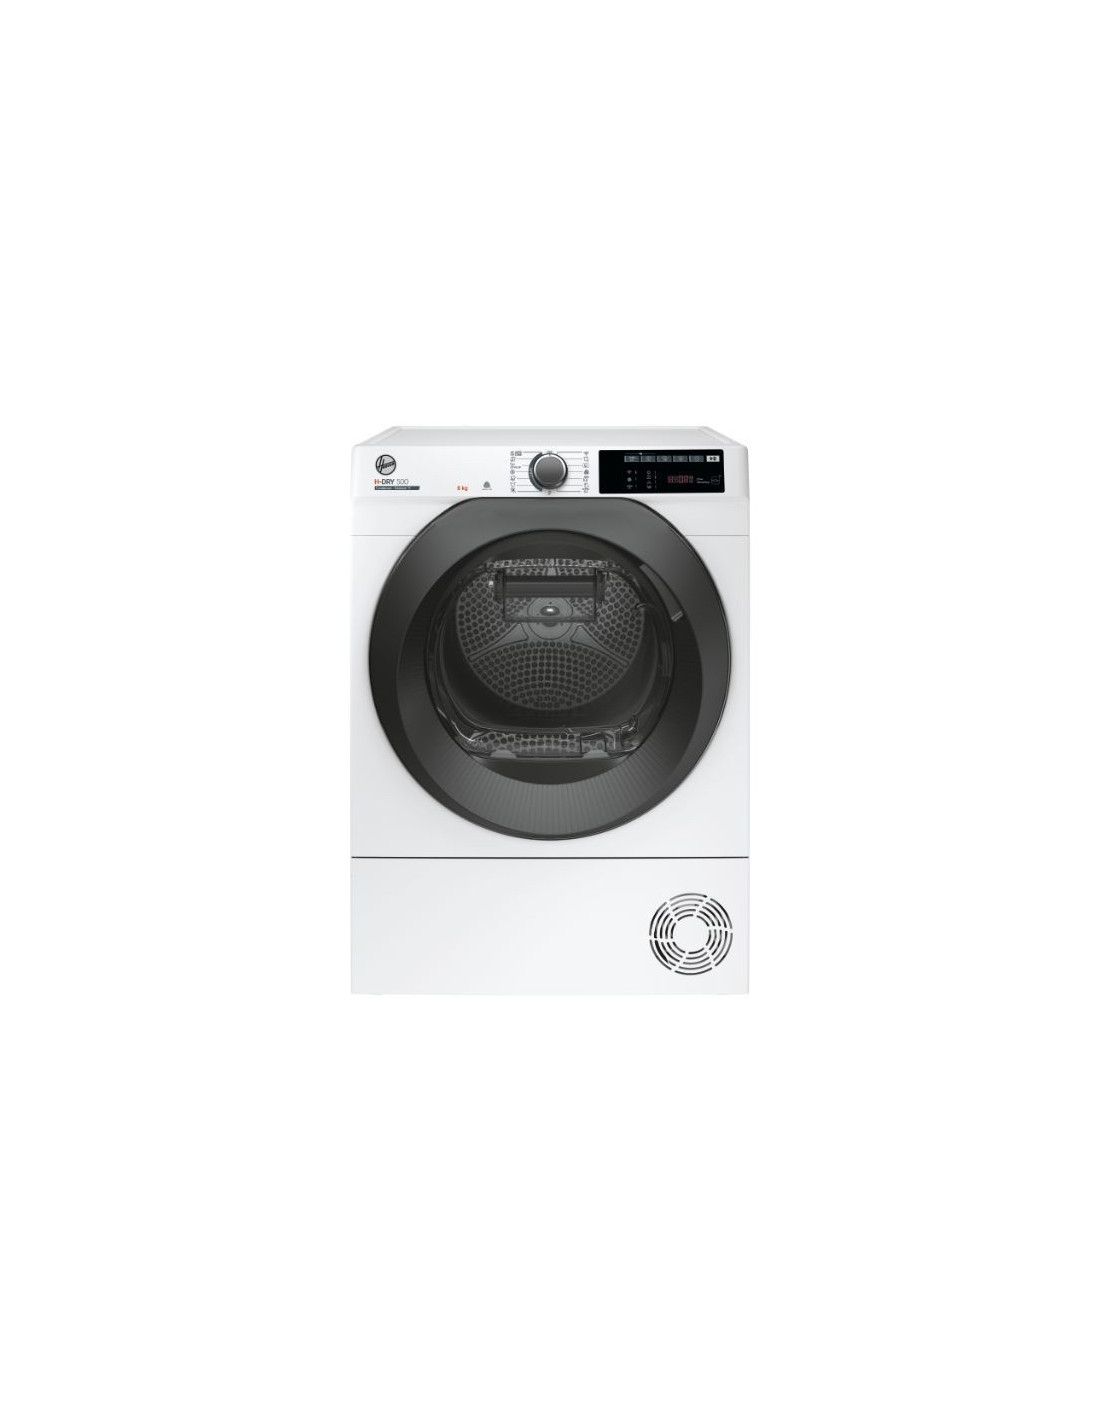 Hoover H-DRY 500 NDE C8TBBEX-S sèche-linge Pose libre Charge avant 8 kg B